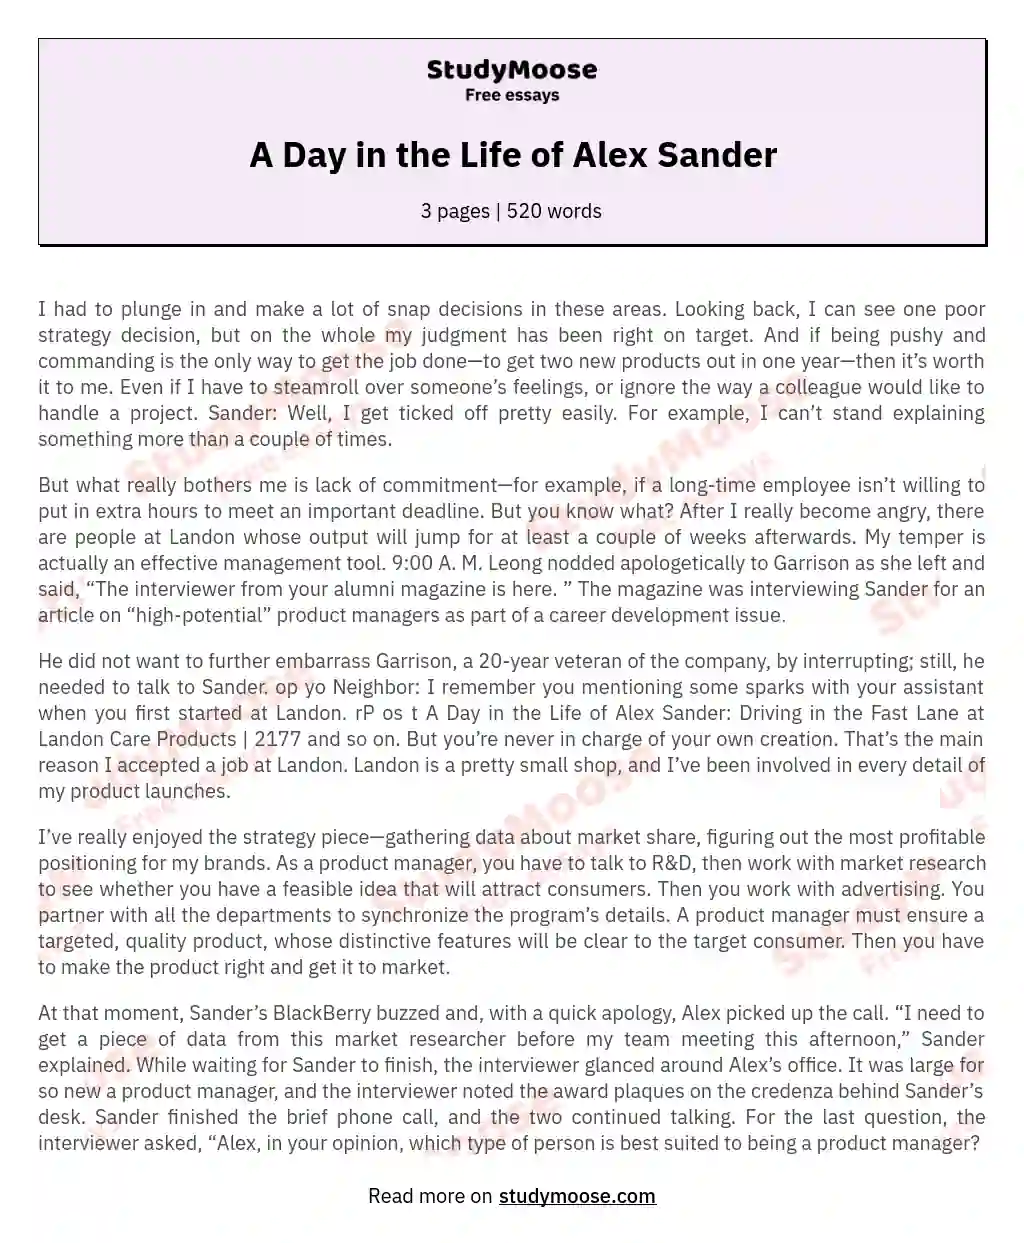 A Day in the Life of Alex Sander essay